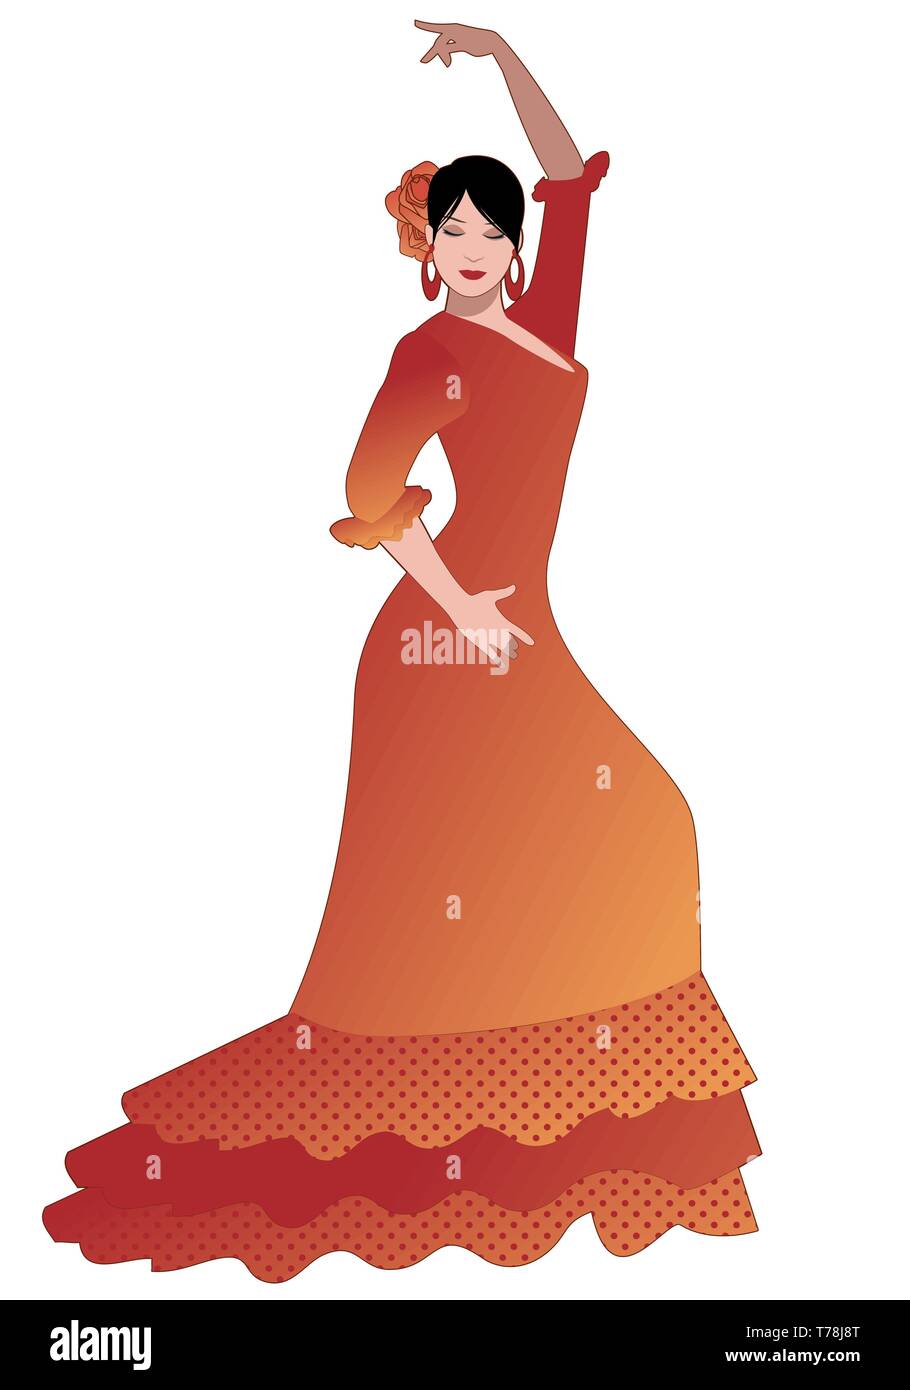 360 Flamenco Hairstyles Stock Photos Pictures  RoyaltyFree Images   iStock